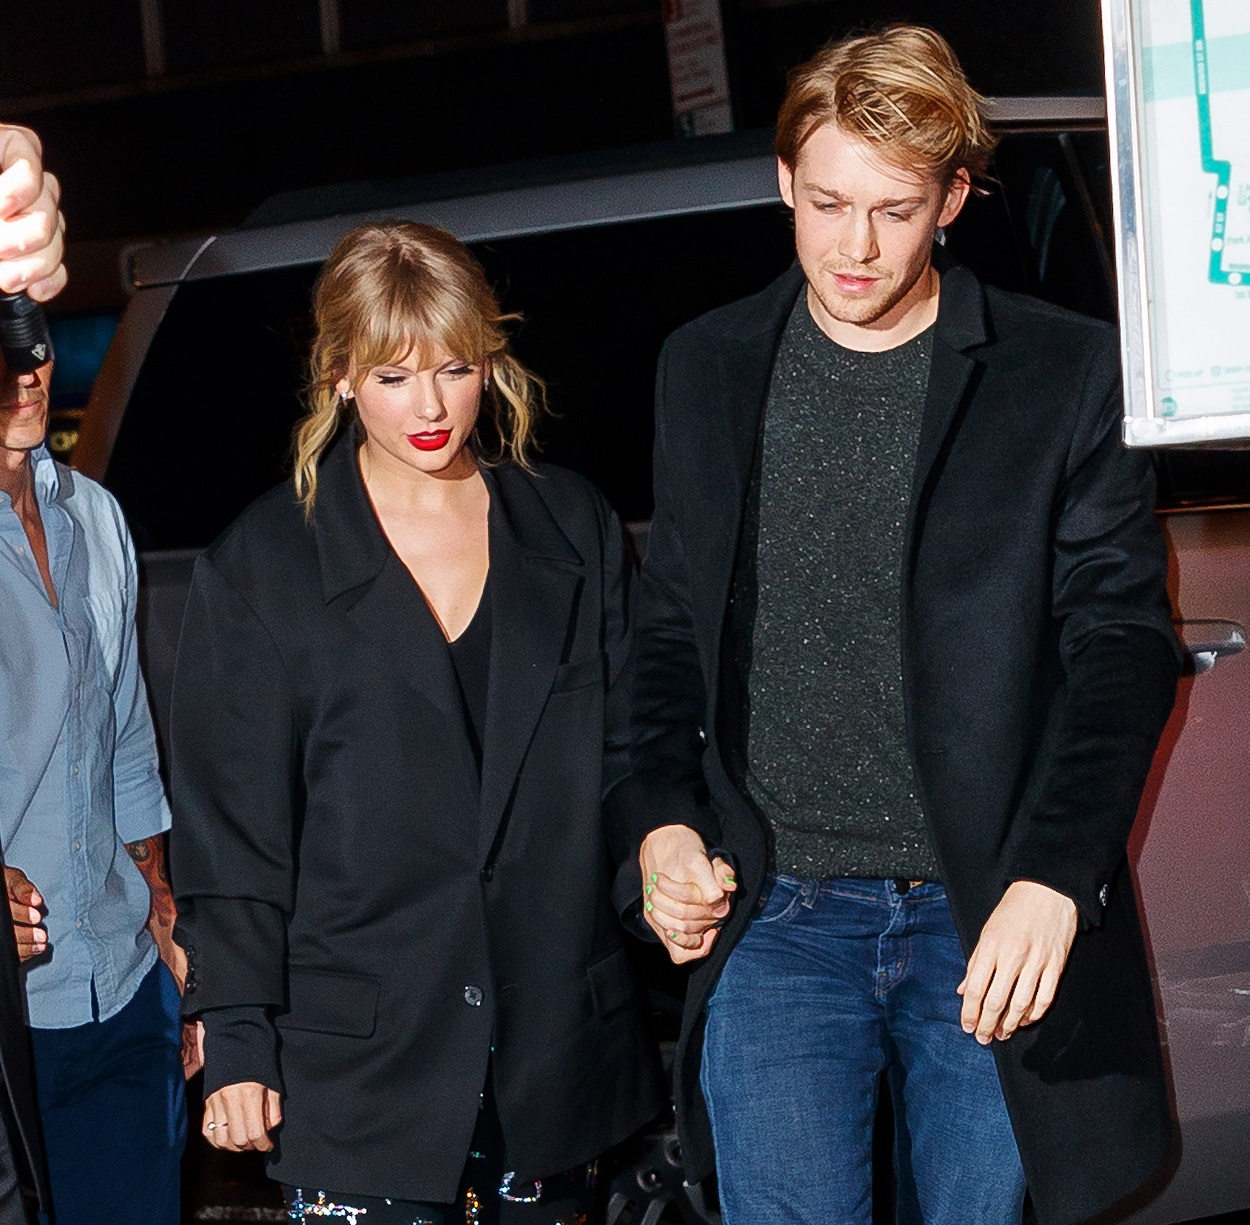 Taylor Swift Reveals How Her Relationship With Her Boyfriend, Joe Alwyn, Has Changed Her Life